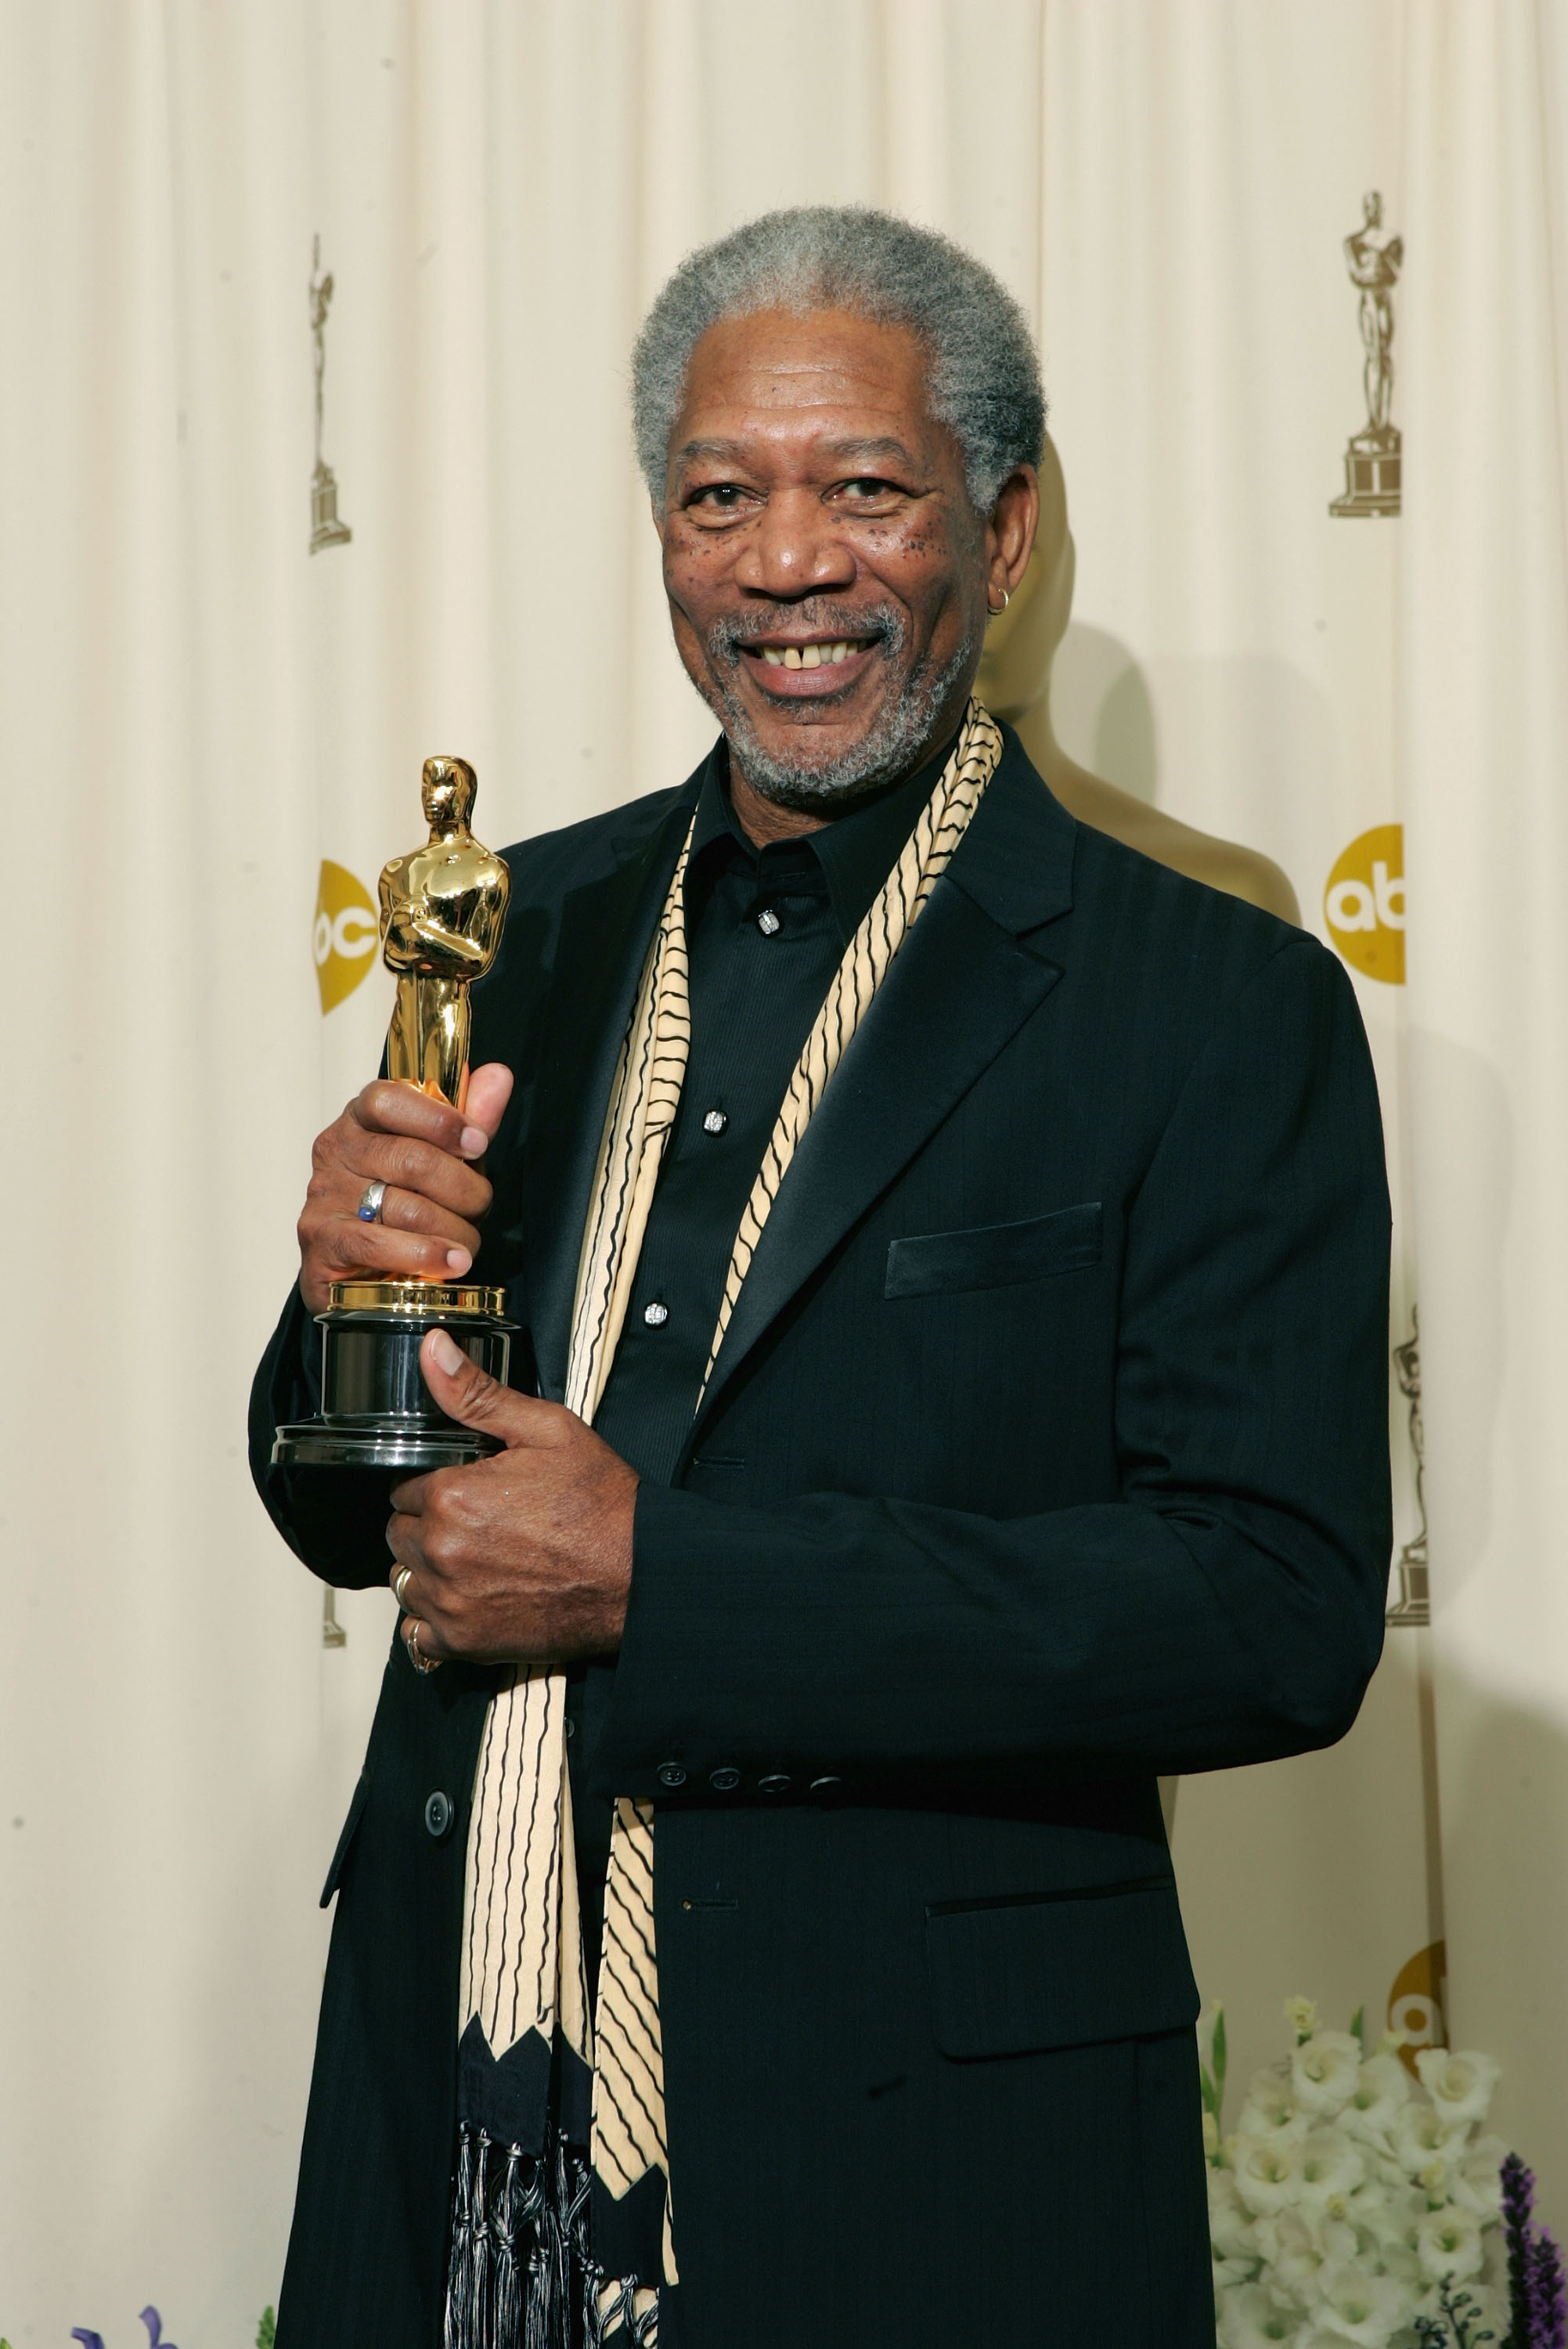 Morgan Freeman at the 77th Annual Academy Awards in 2005 | Source: Getty Images